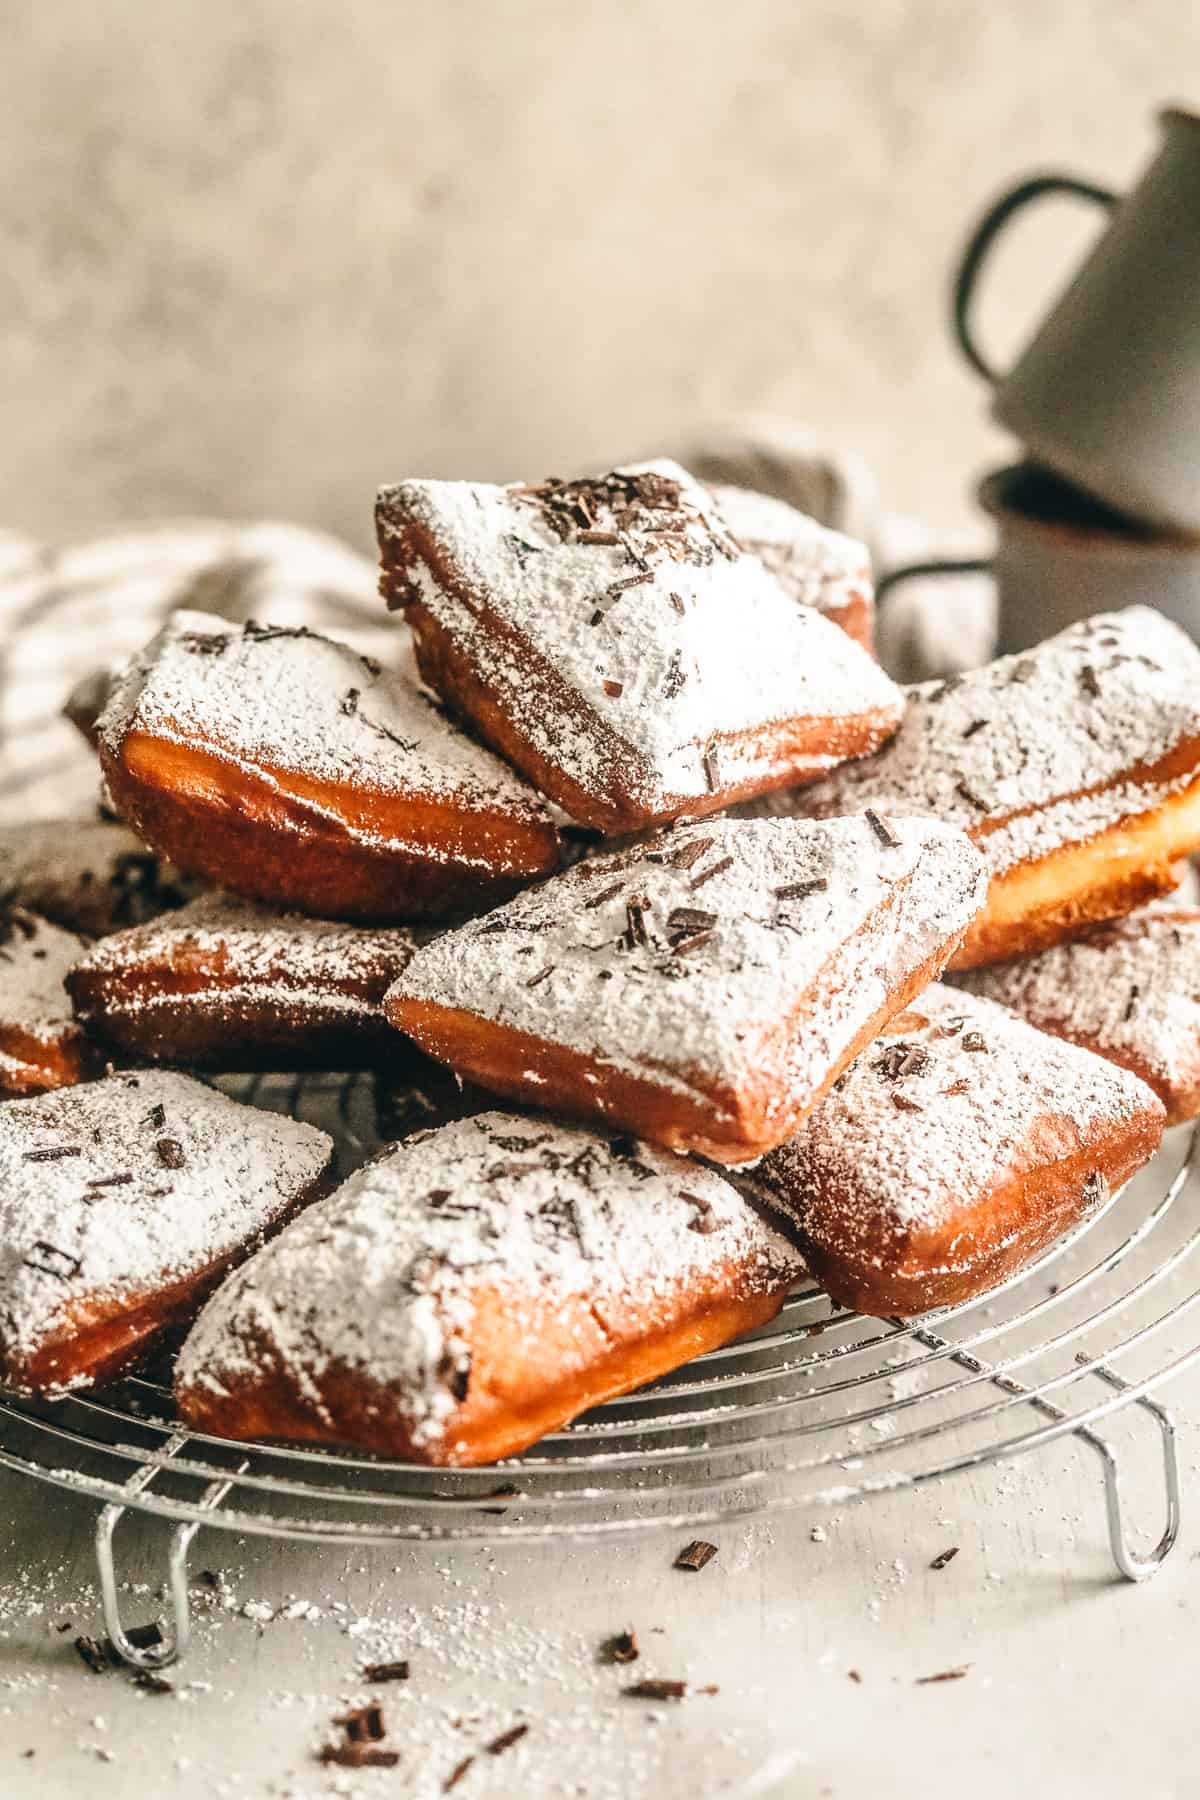 new orleans style beignets on a rack with a coffee mug